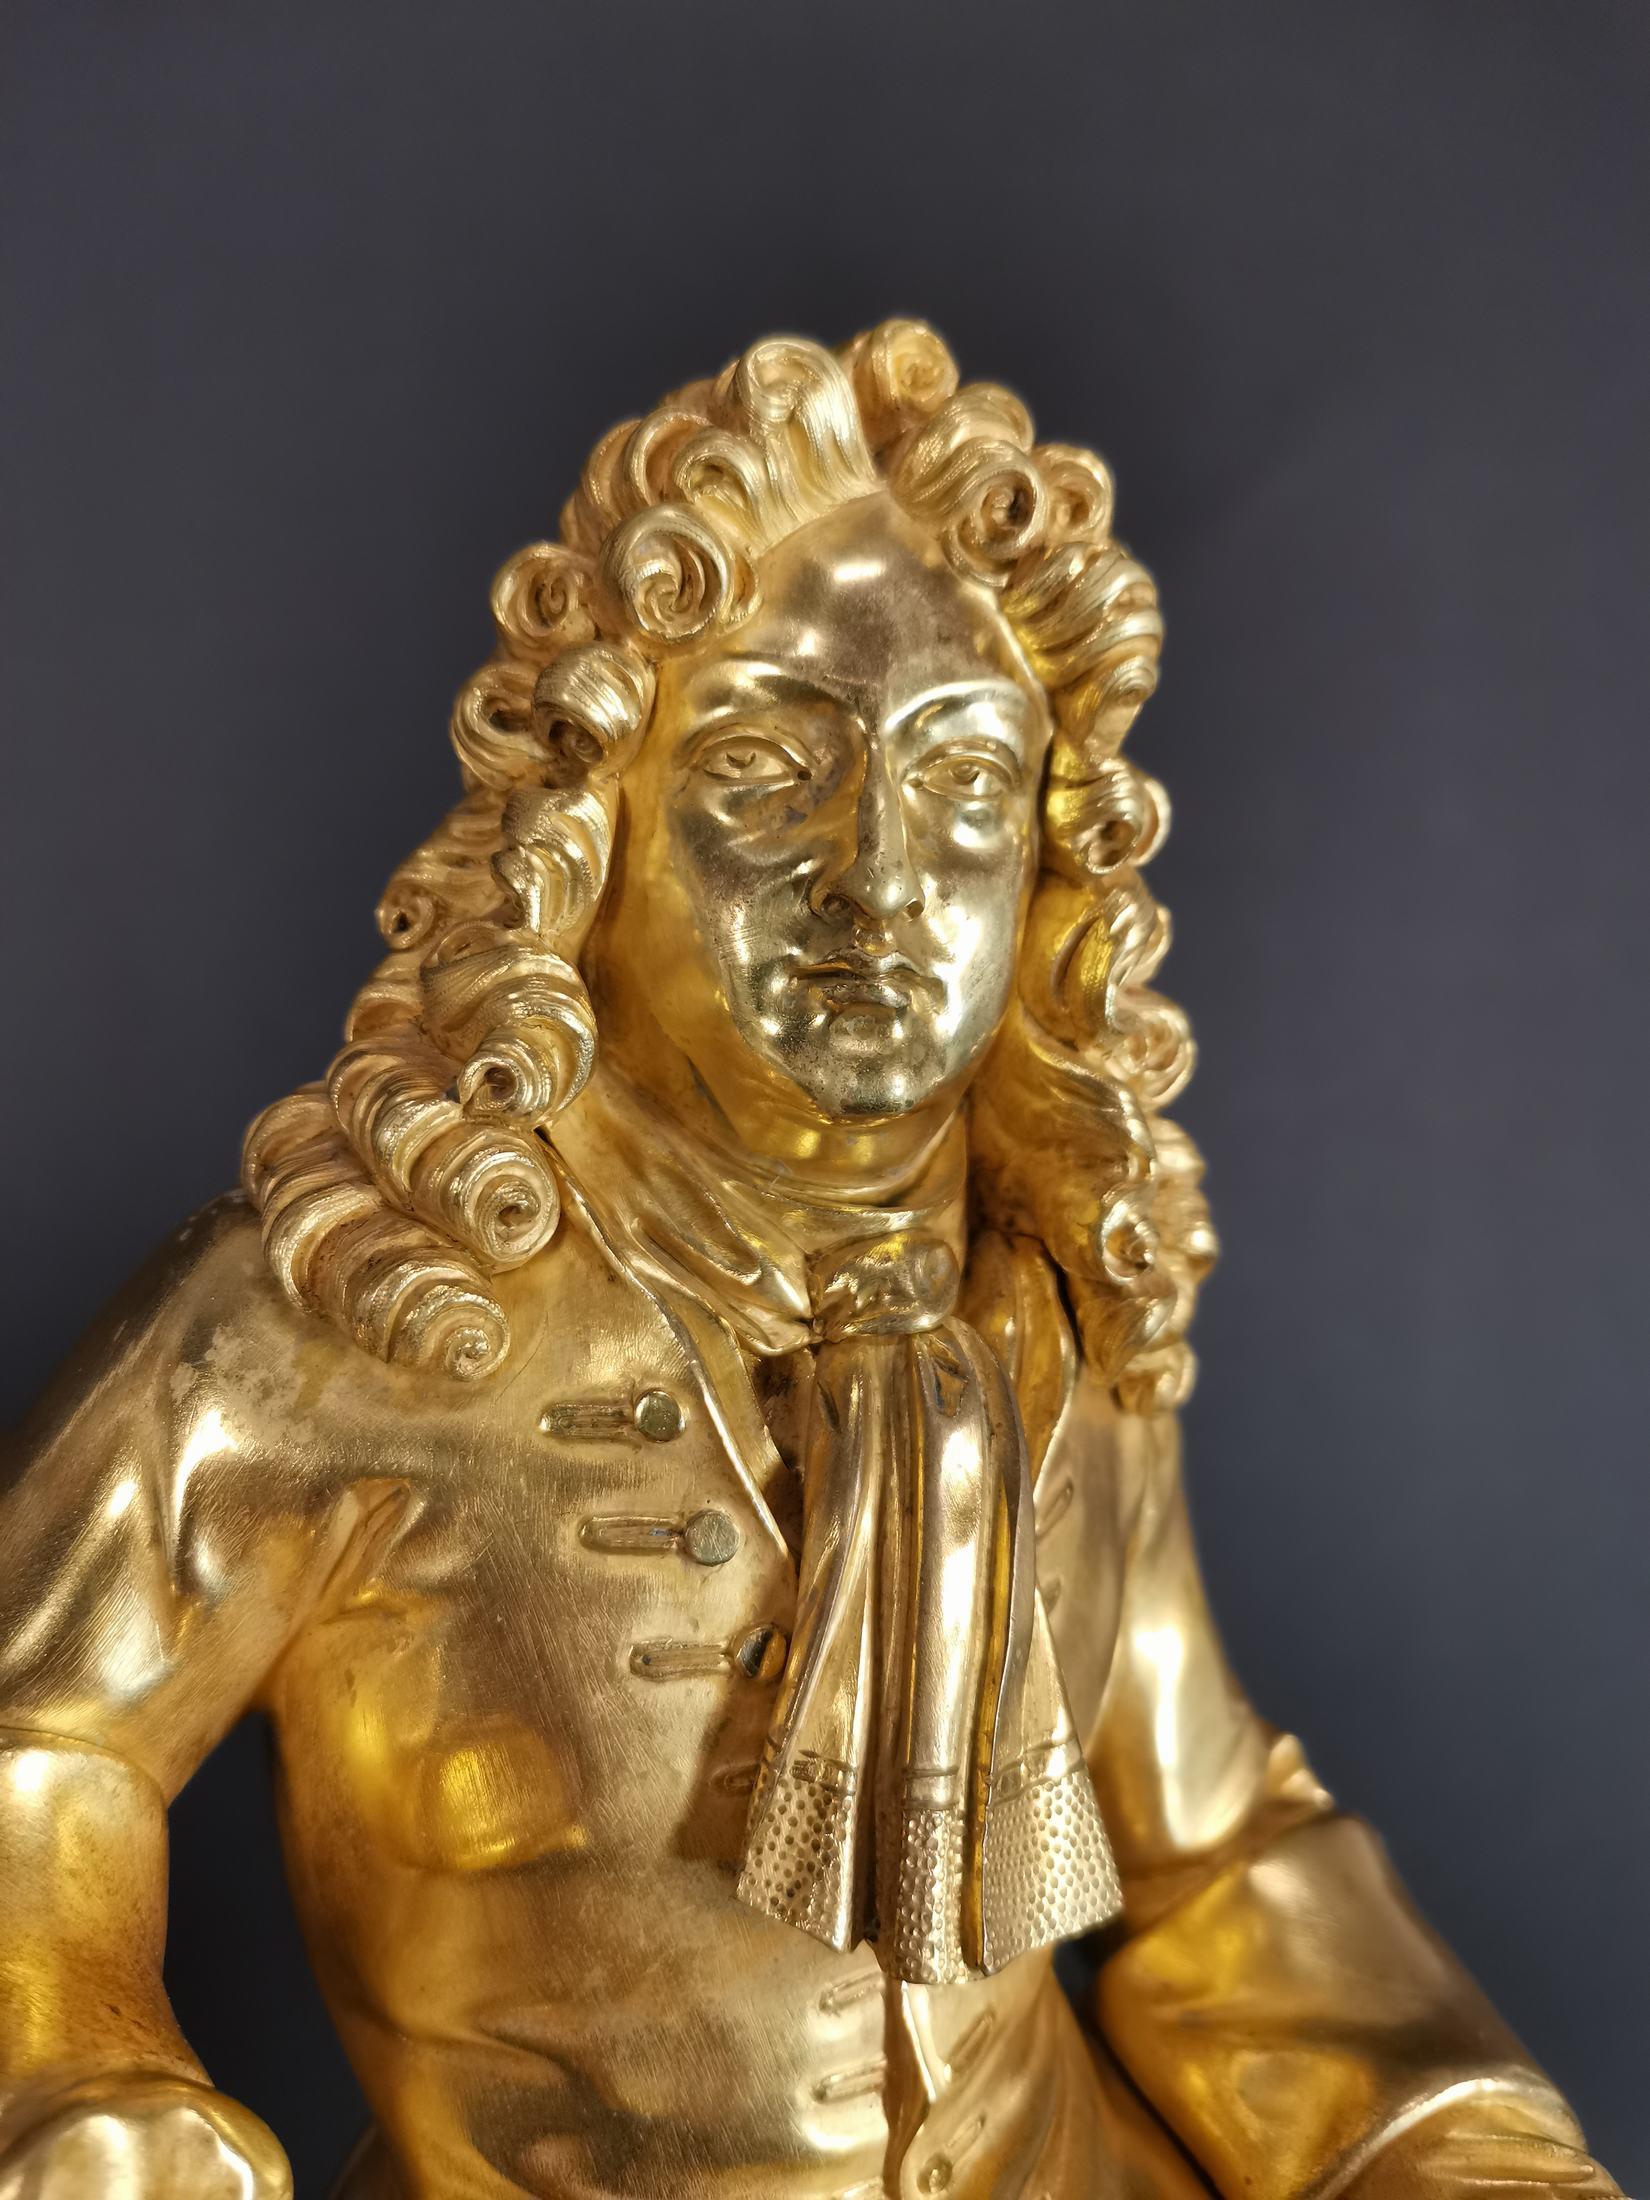 Large Gilded Bronze Clock with Louis XIV Figure, 18th Century For Sale 2